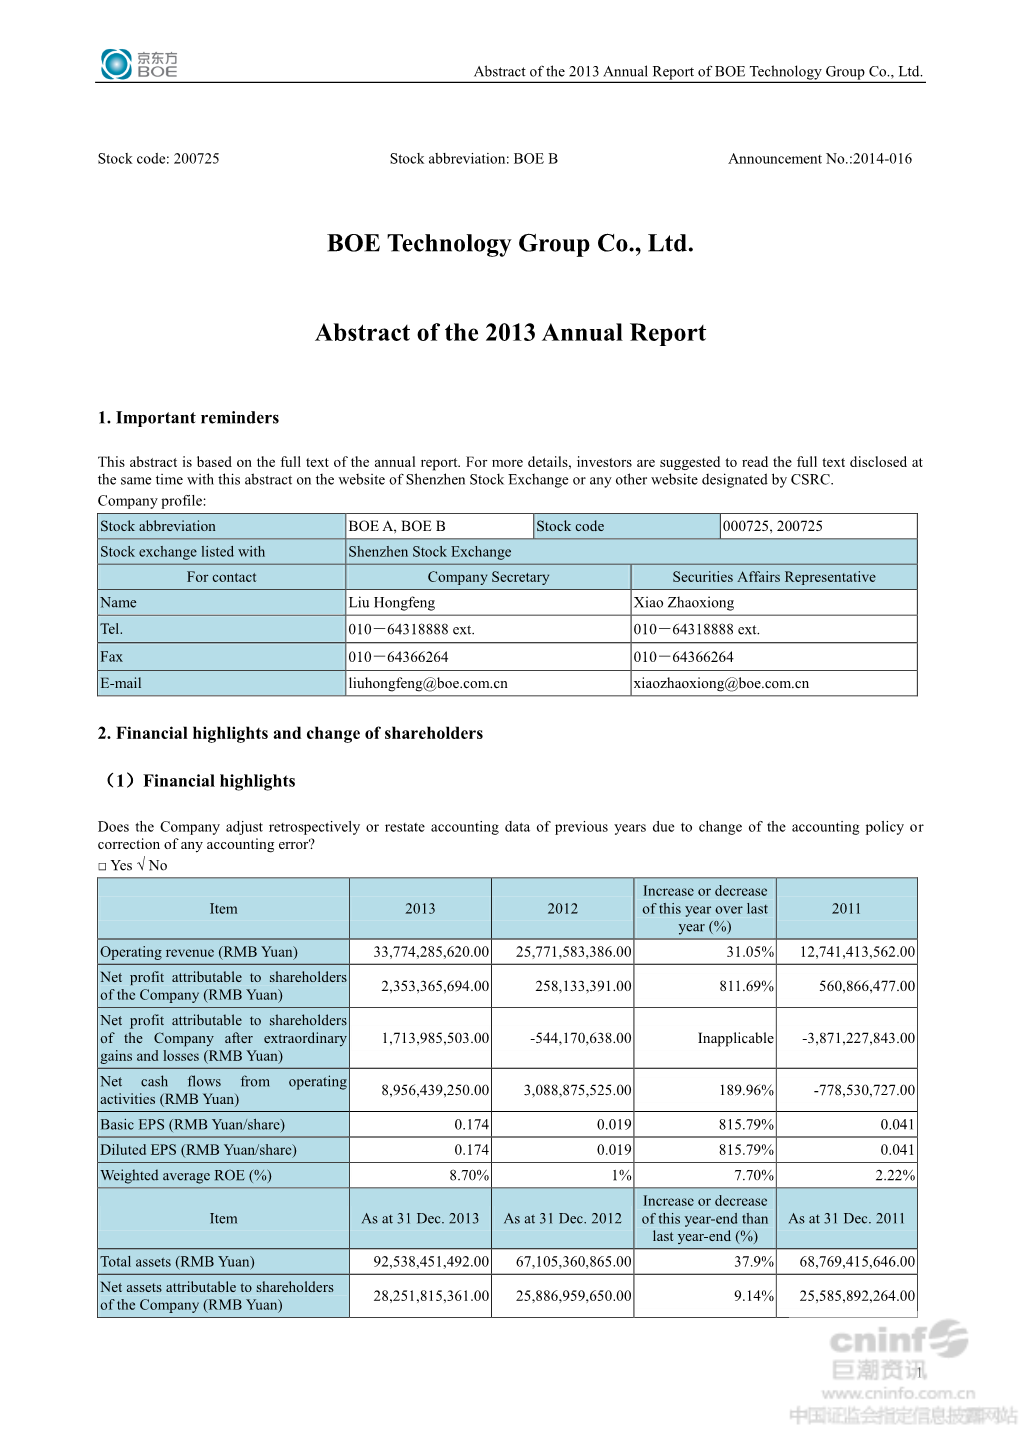 BOE Technology Group Co., Ltd. Abstract of the 2013 Annual Report